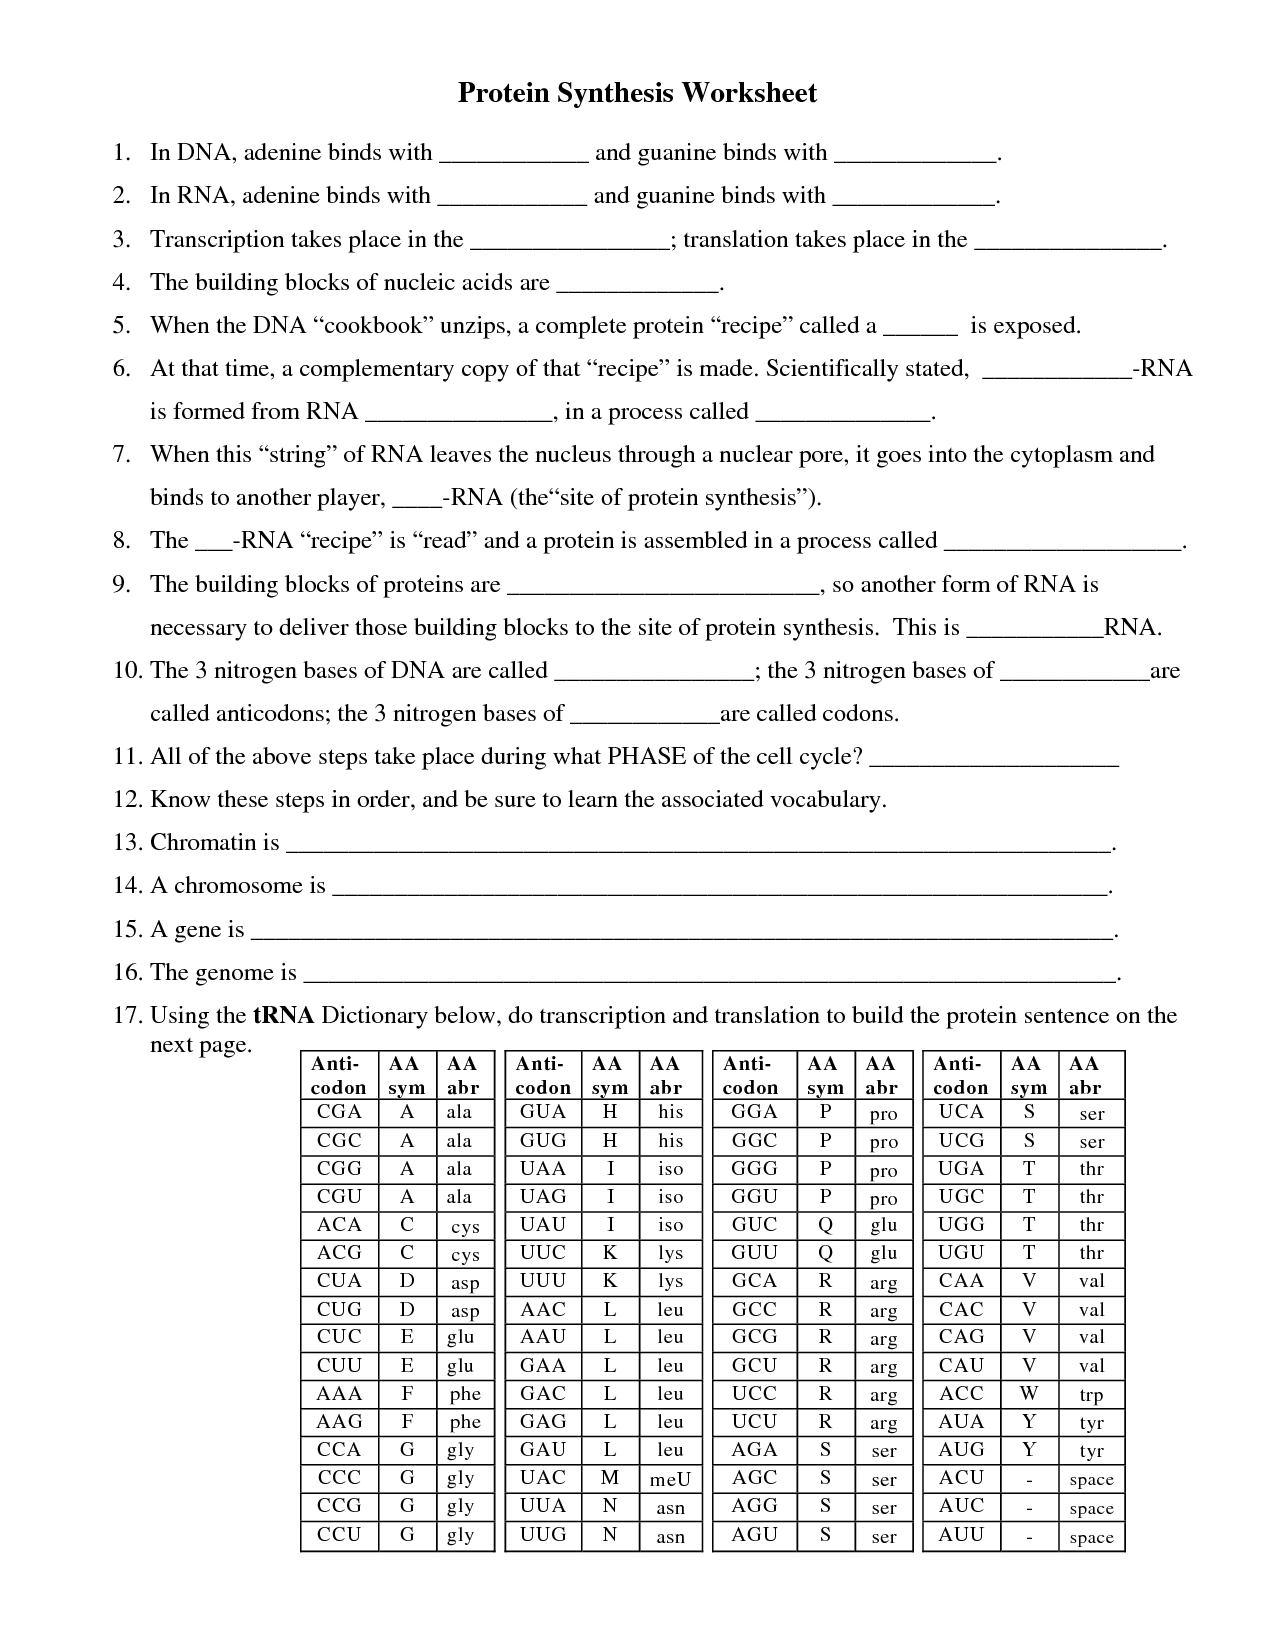 Protein Synthesis Summary Worksheet Answers